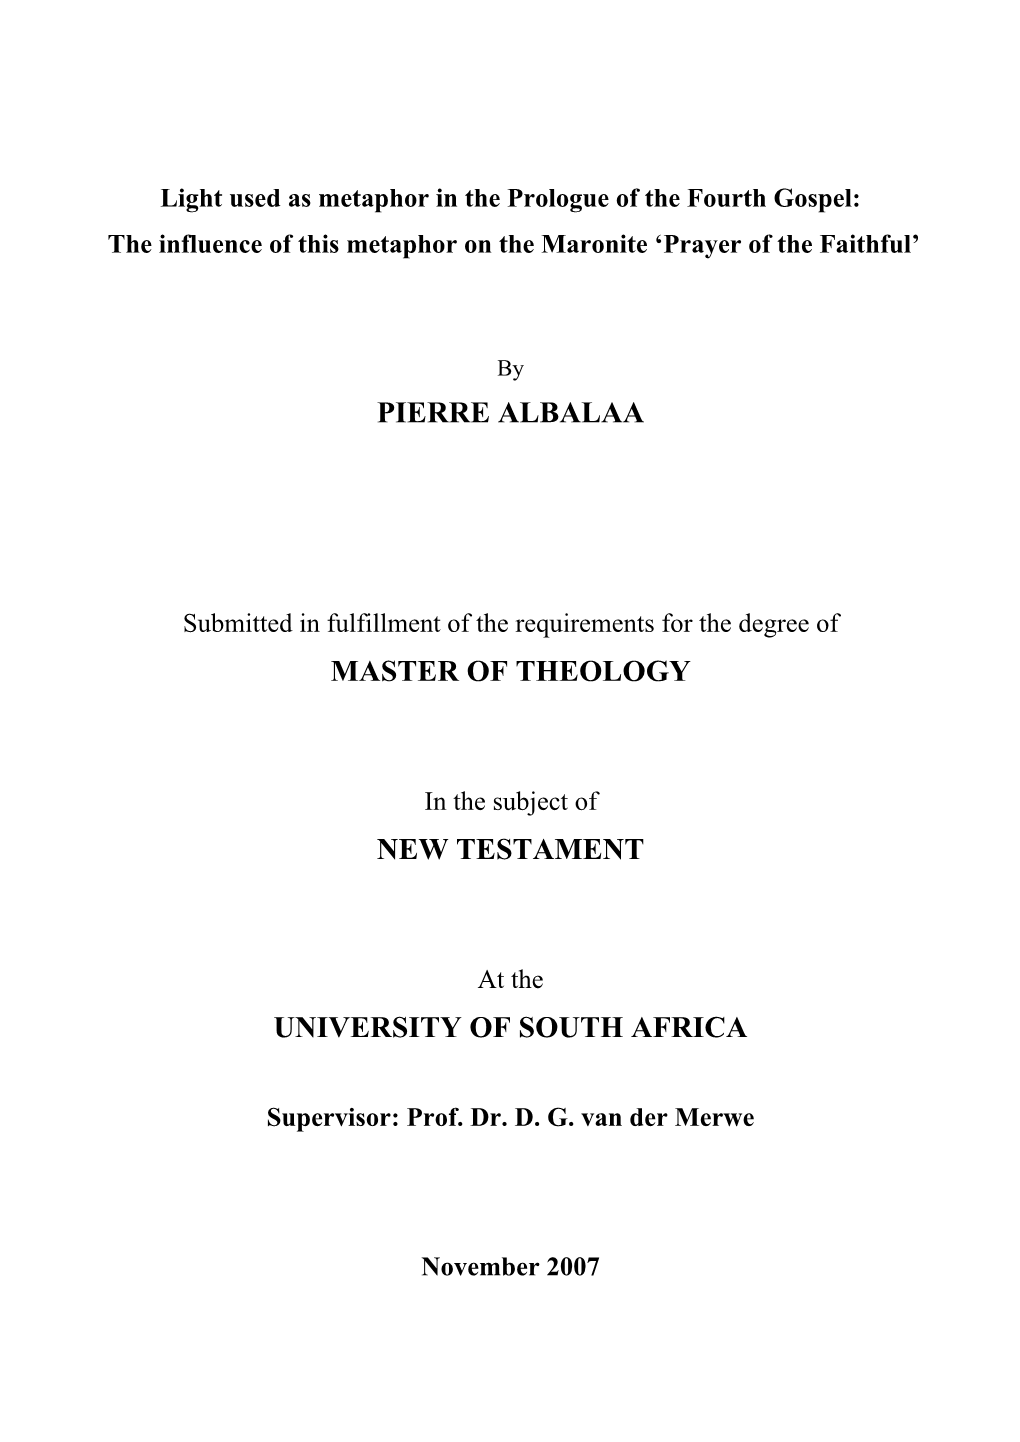 Pierre Albalaa Master of Theology New Testament University of South Africa